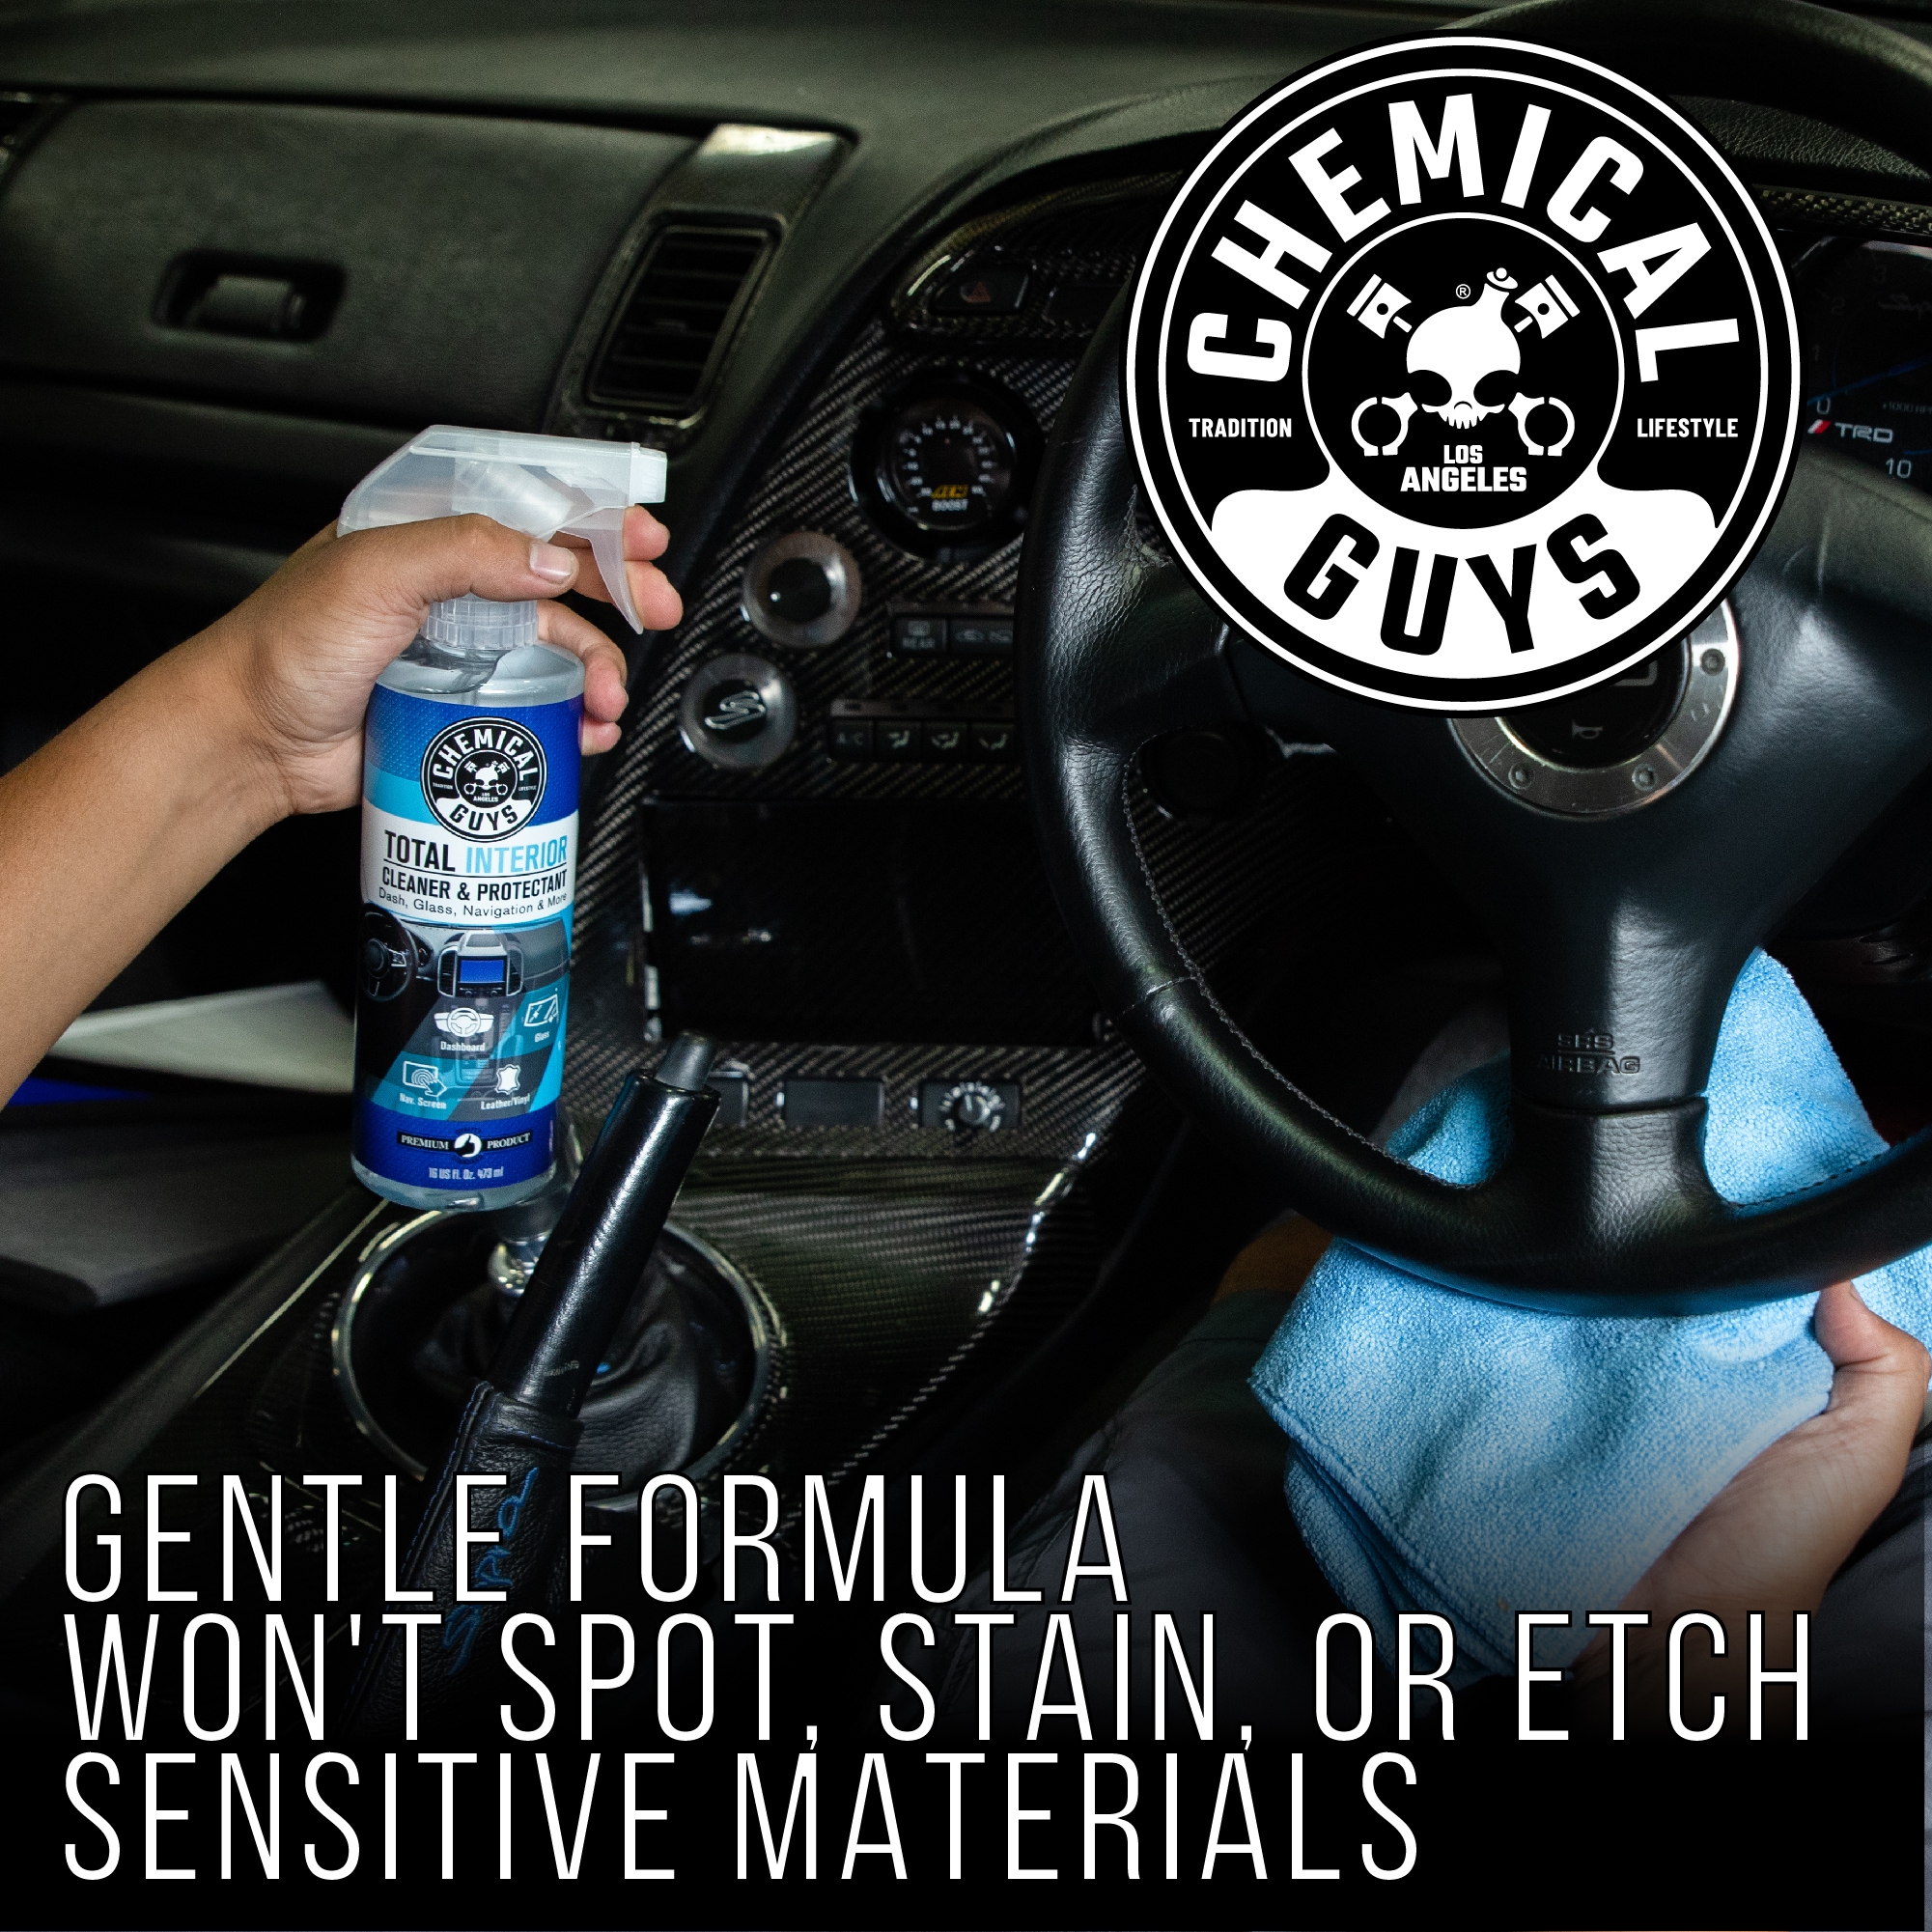  Chemical Guys SPI_192_16 Convertible Top Cleaner (16